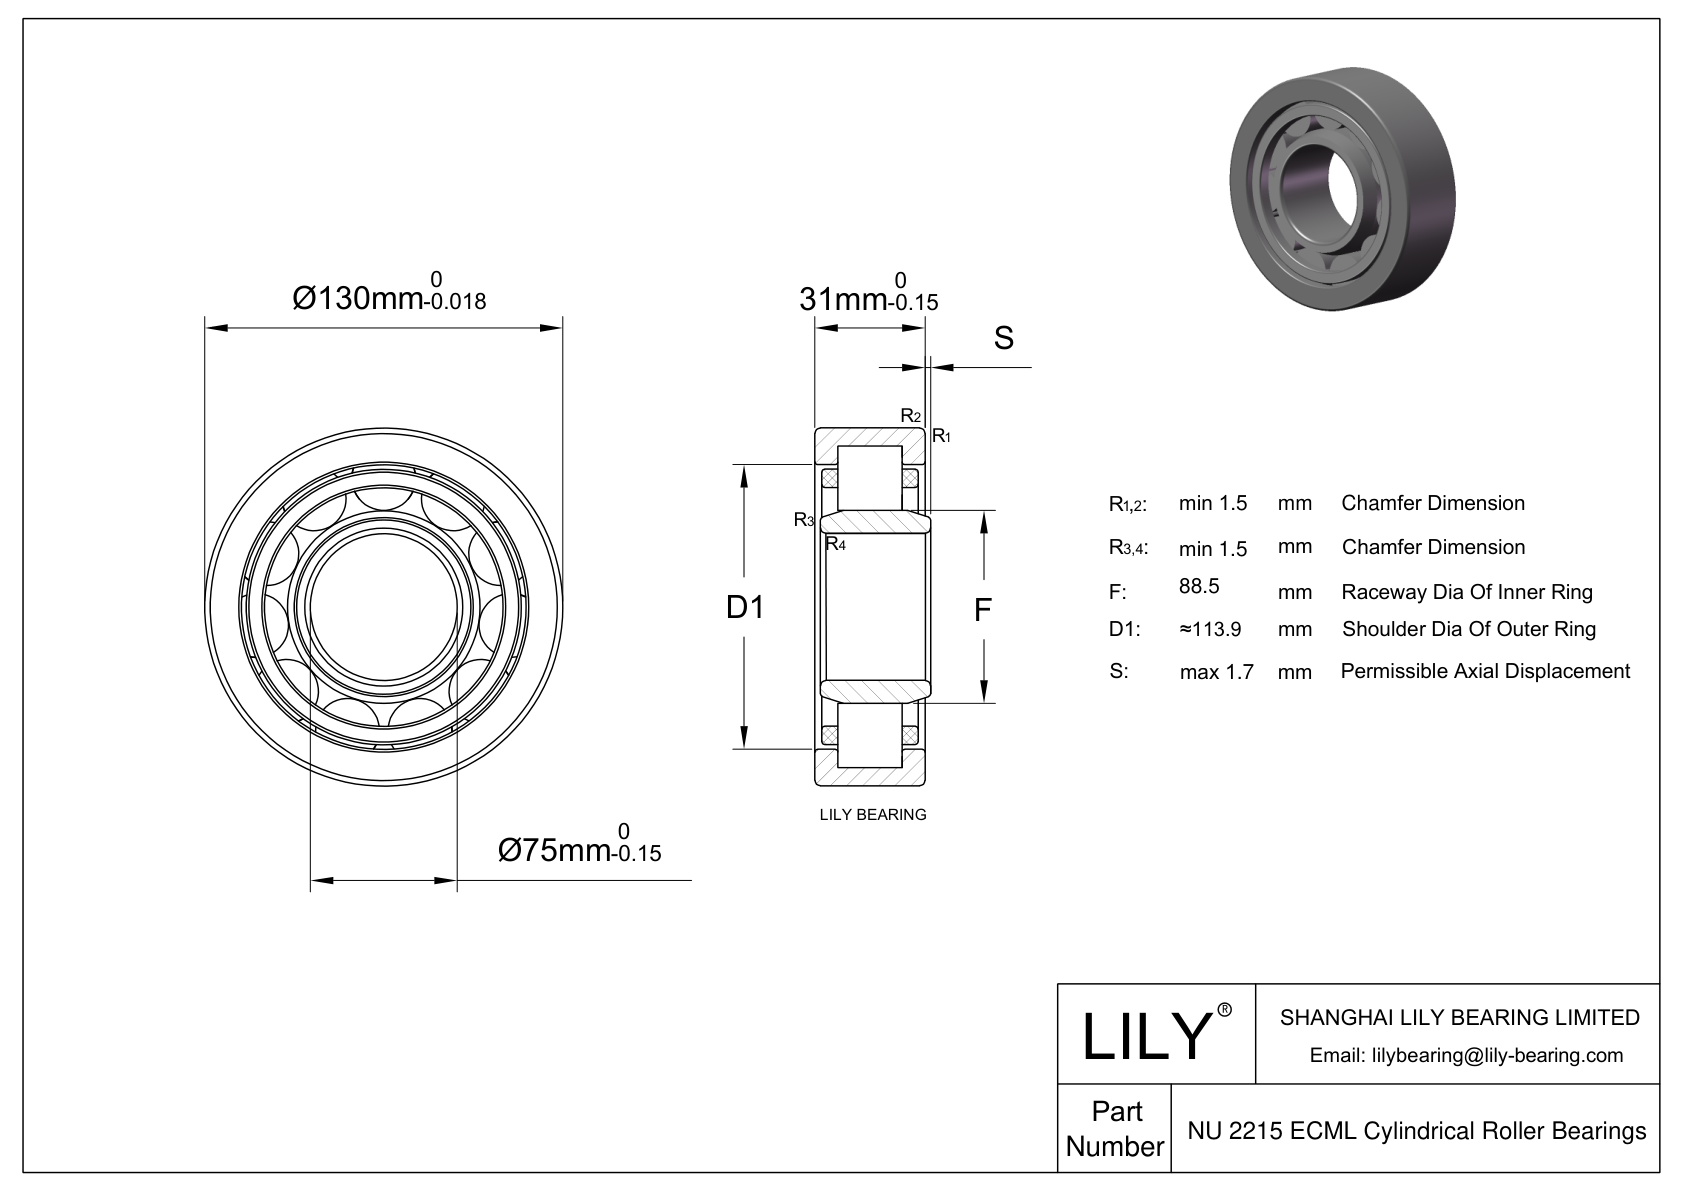 NU 2215 ECML Single Row Cylindrical Roller Bearings With Inner Ring cad drawing